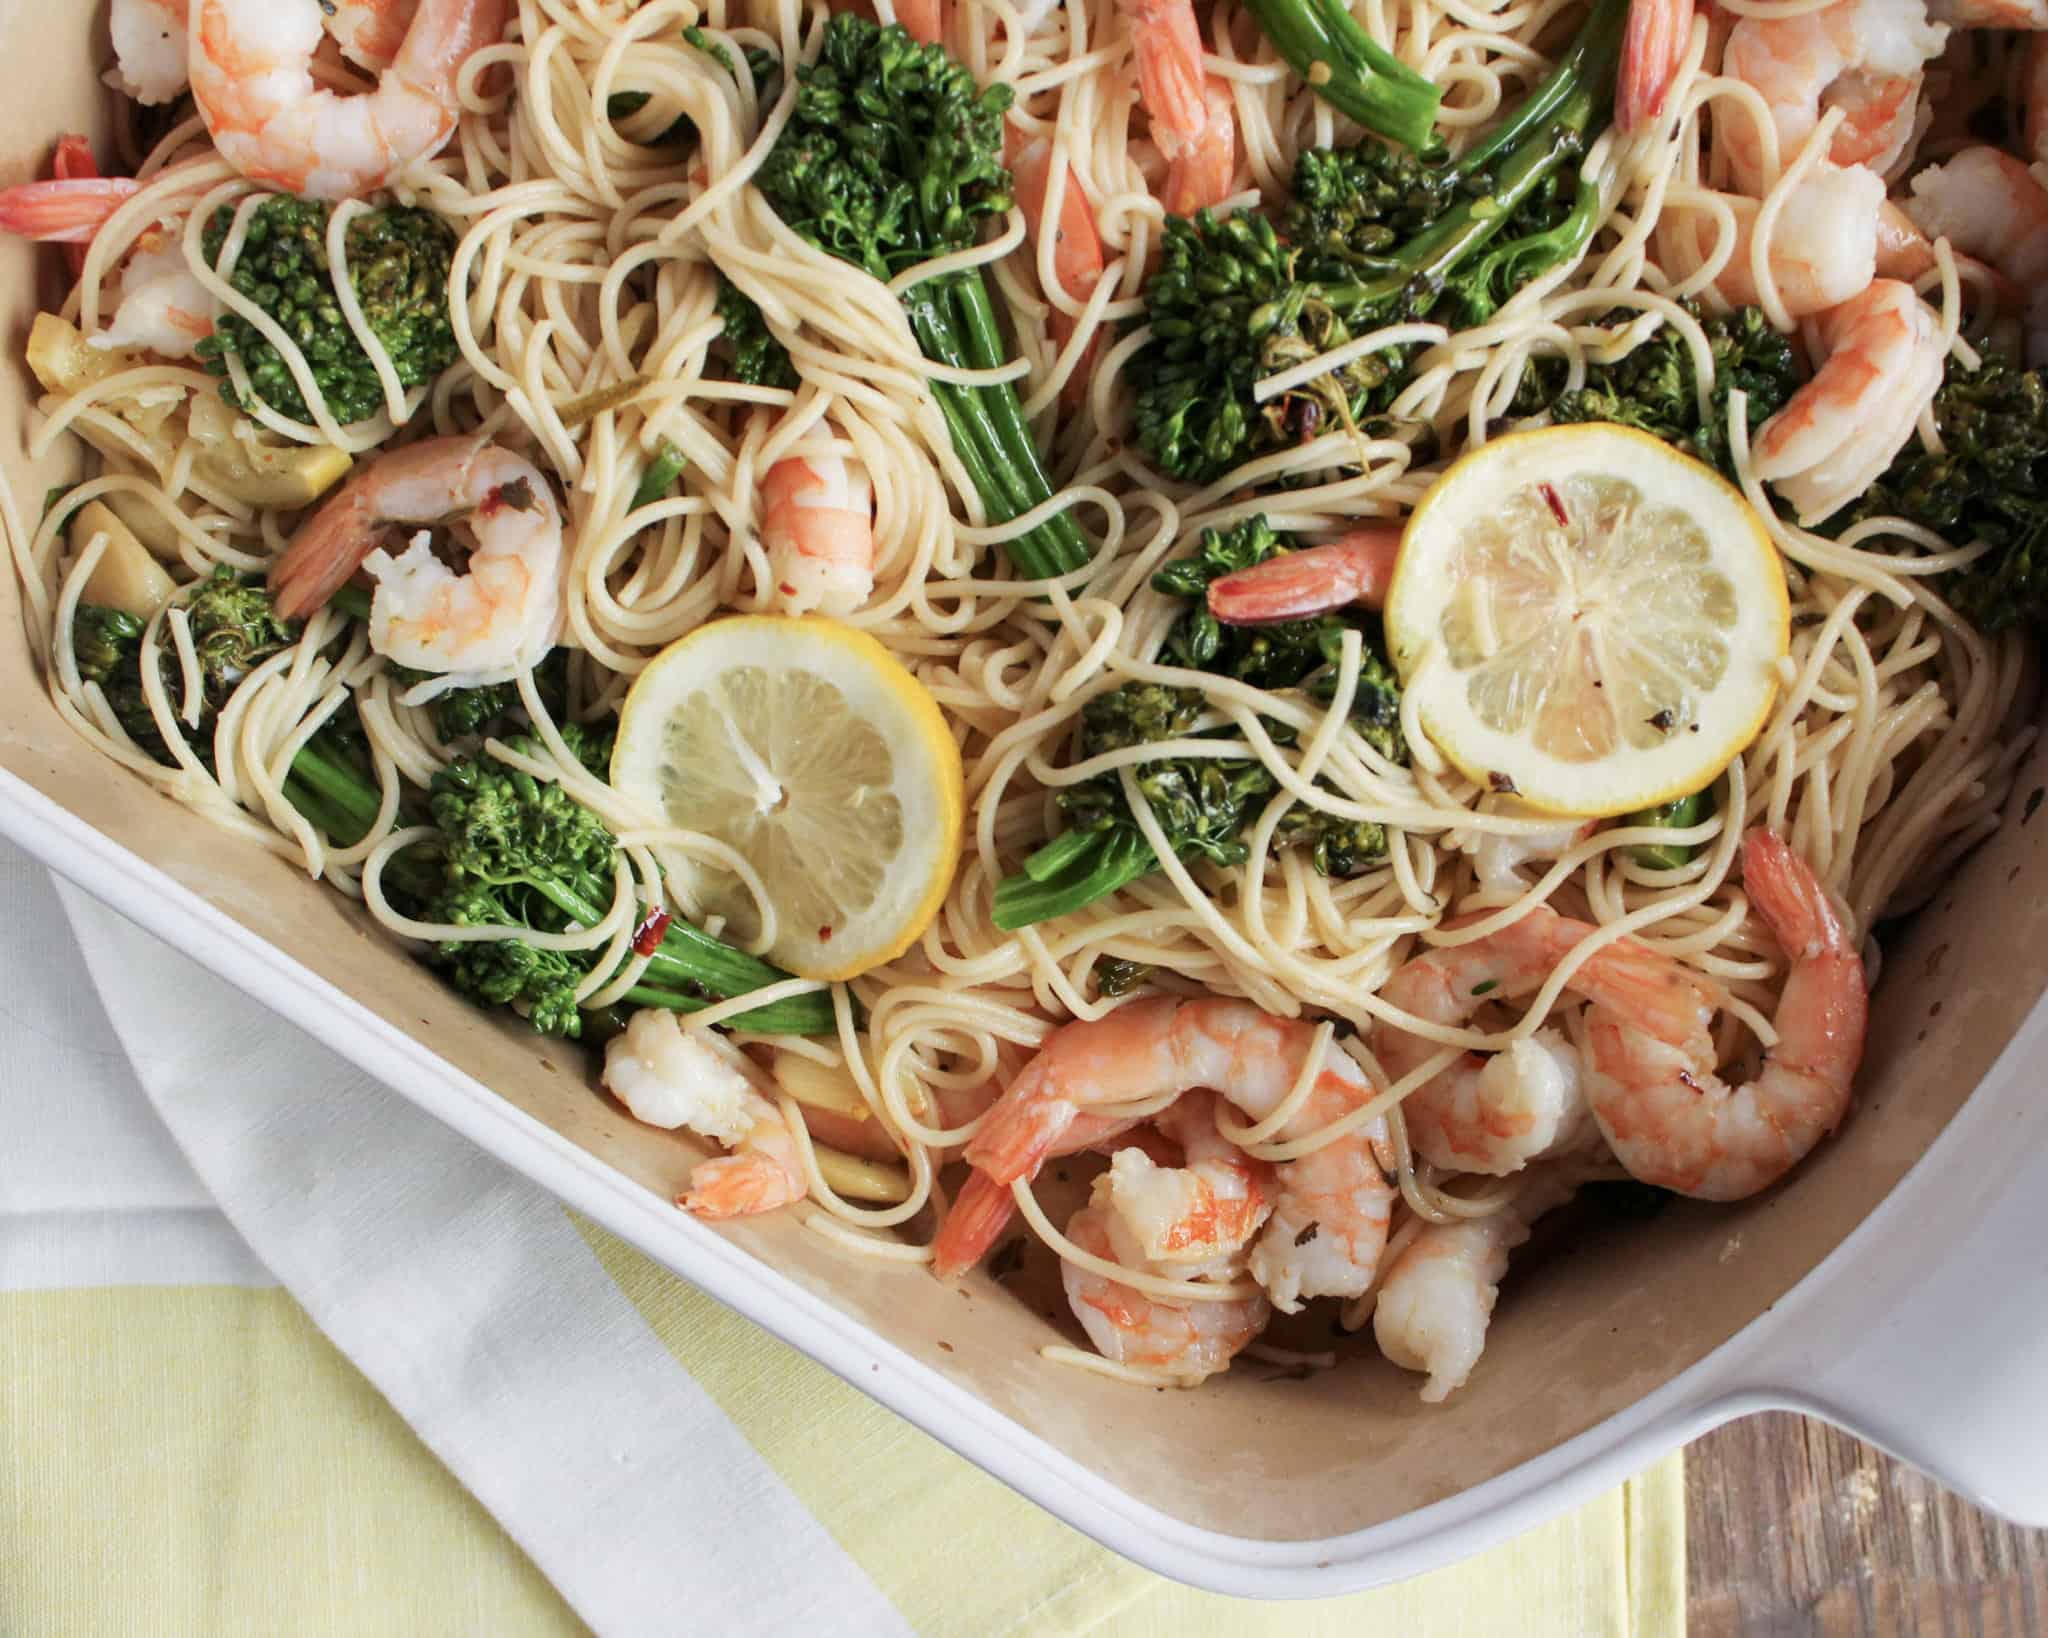 Lemon Baked Shrimp with Pasta is a quick and easy weeknight meal that's ready in 30 minutes or less